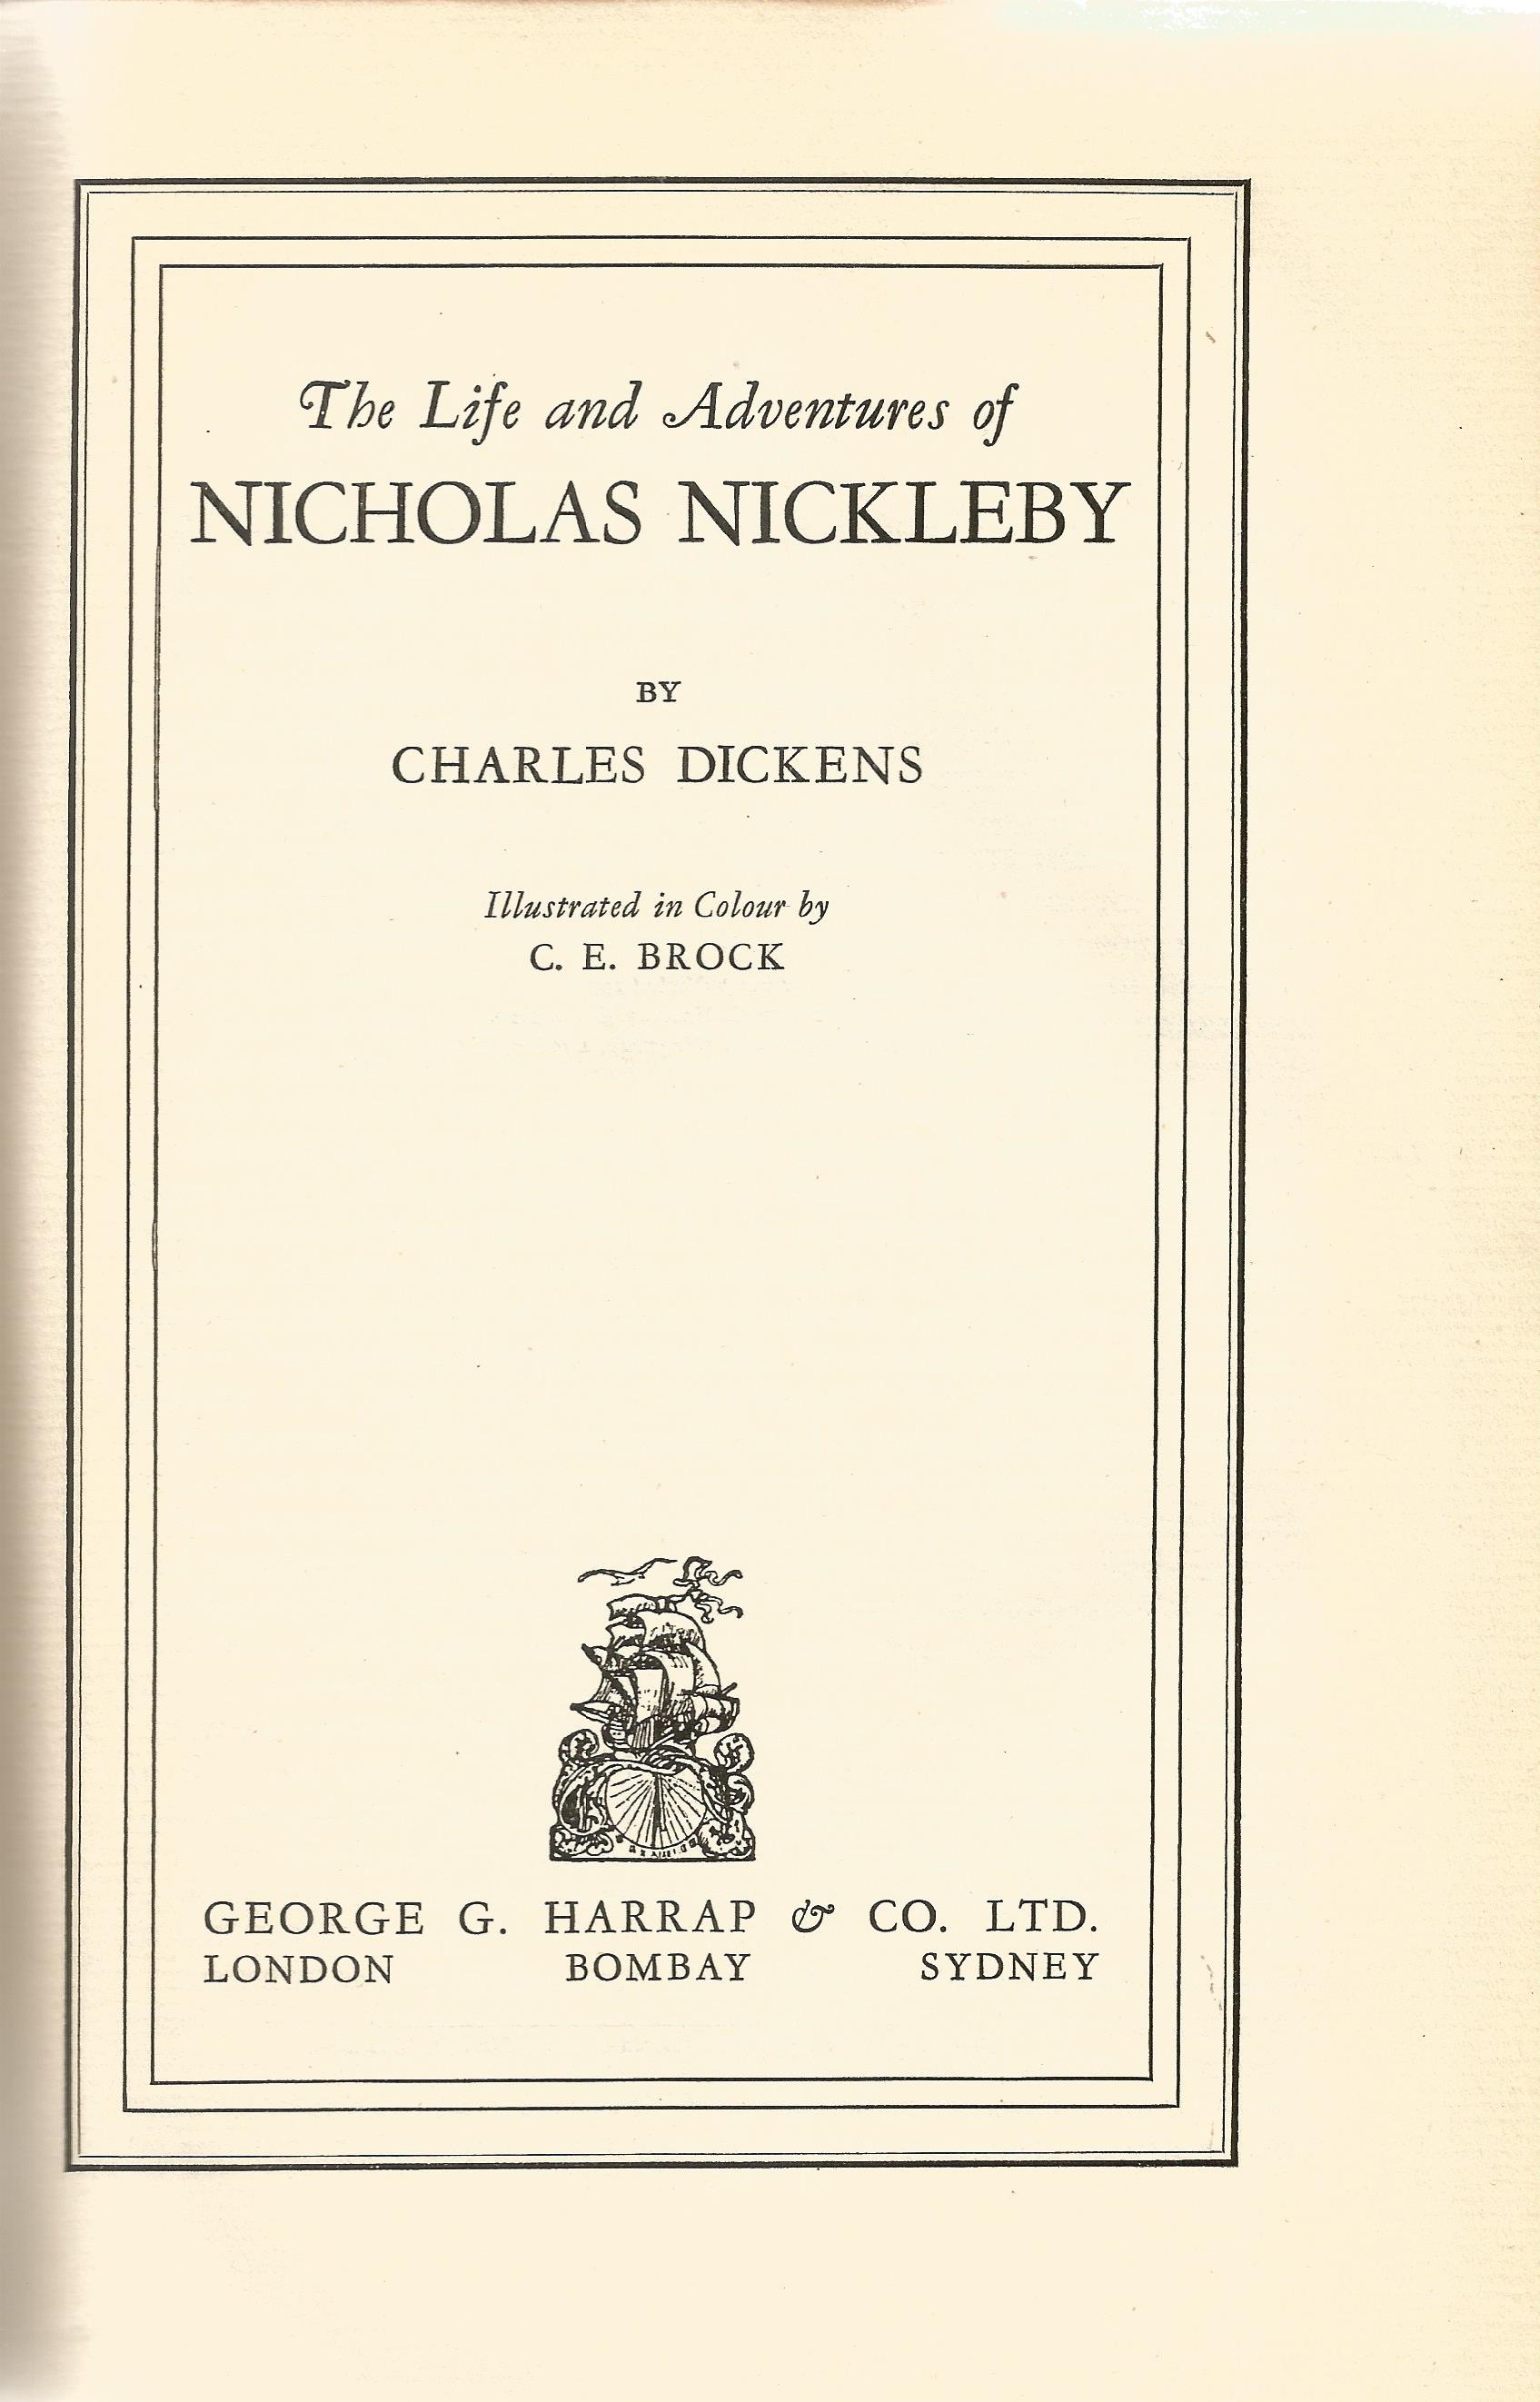 Charles Dickens hardback book The Life and Adventures of Nicholas Nickleby 1931 First Edition - Image 2 of 2